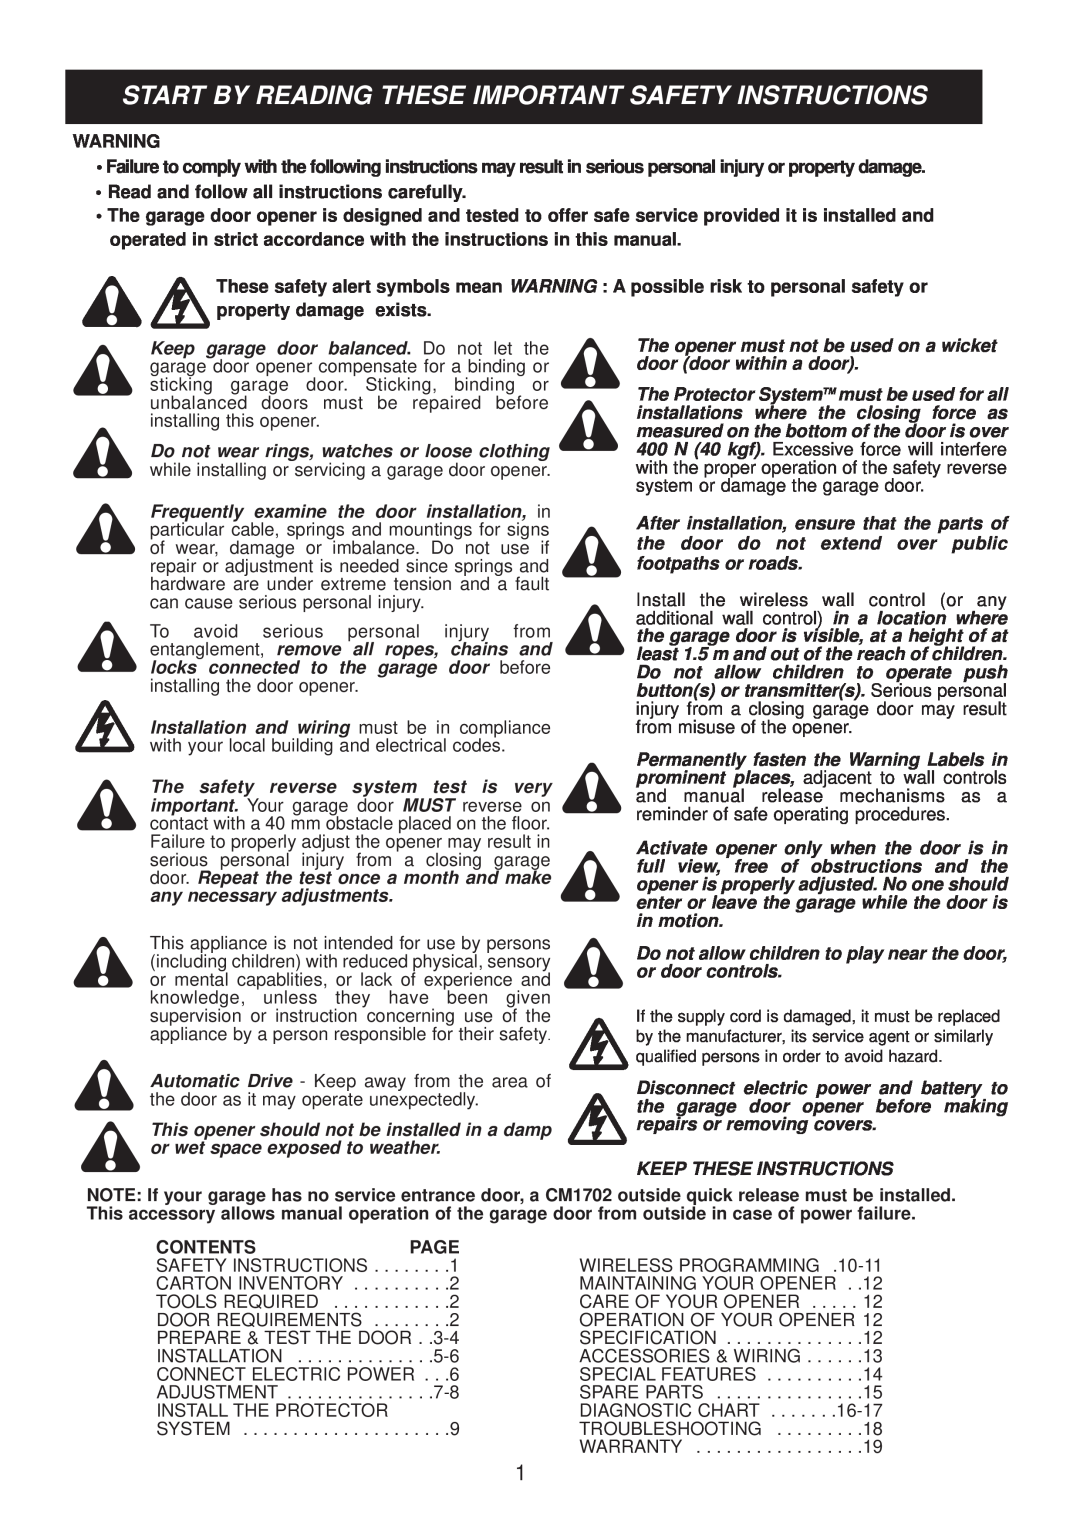 Chamberlain MR650EVO Start By Reading These Important Safety Instructions, Read and follow all instructions carefully 